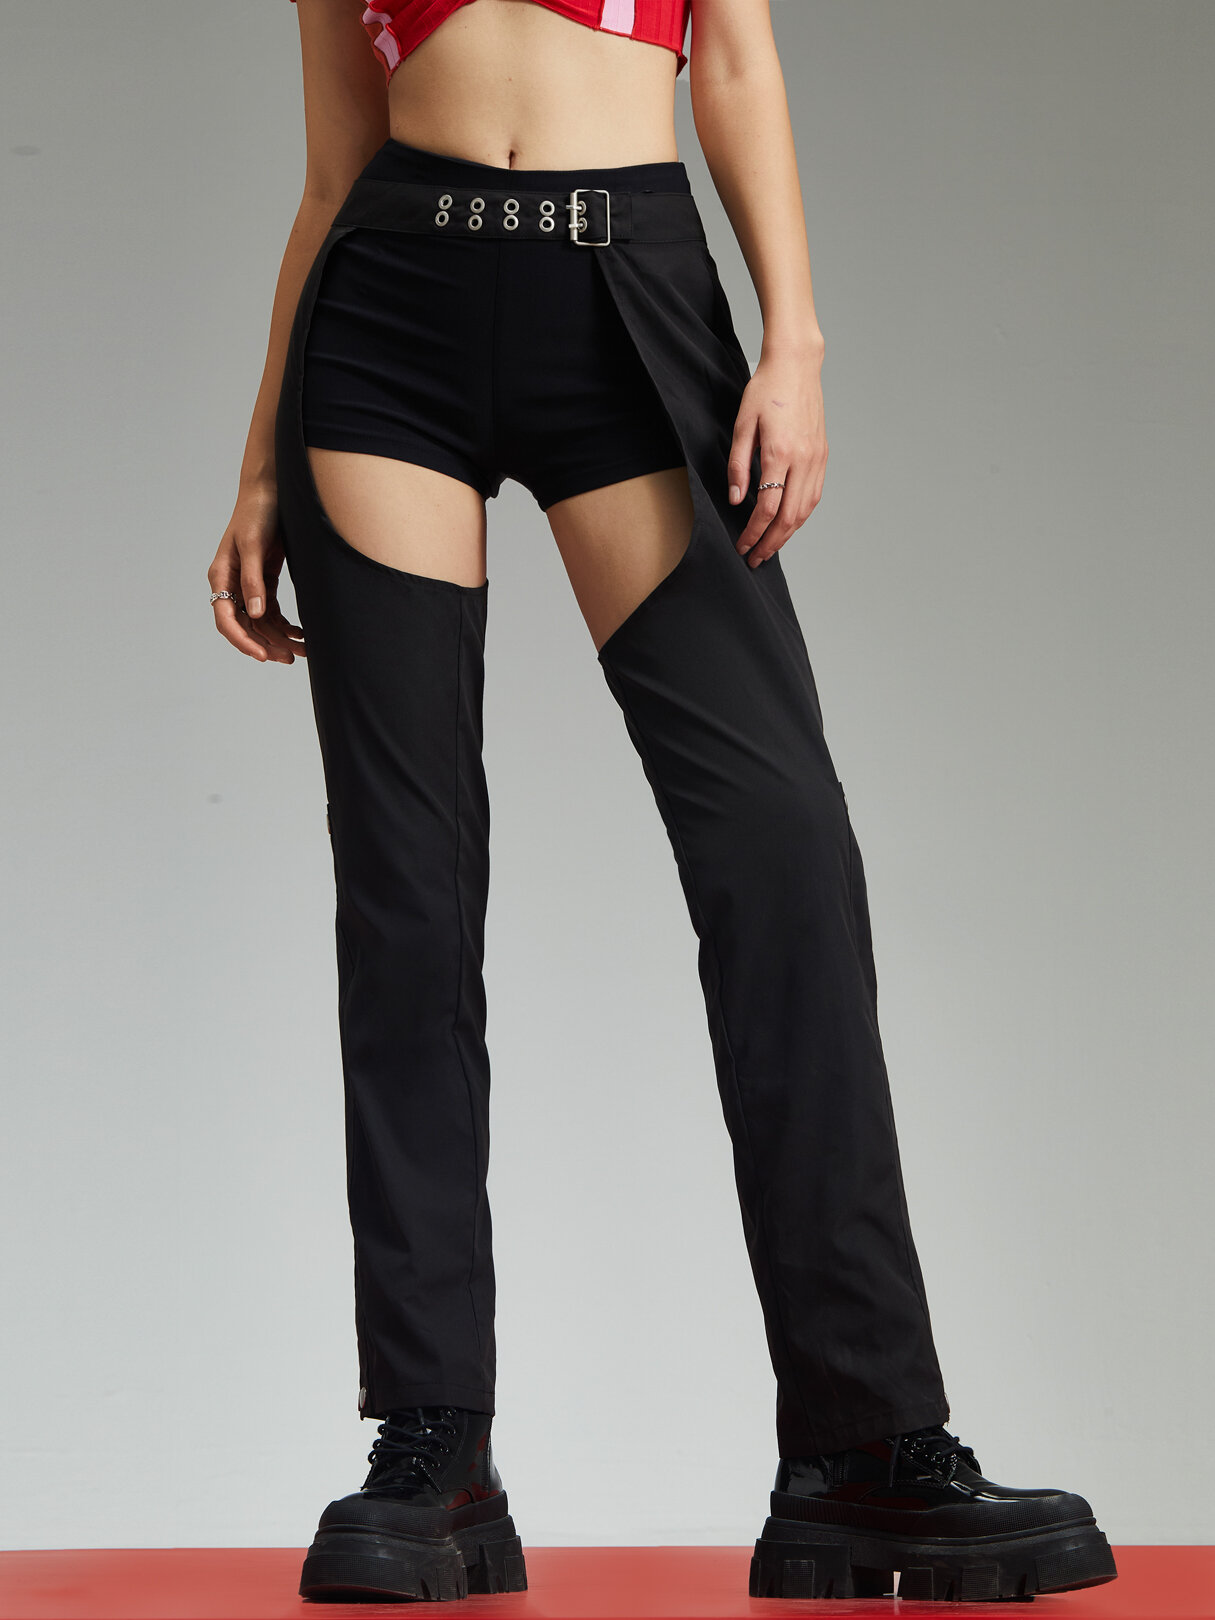 Solid Cut Out Invisible Zip Pants For Women